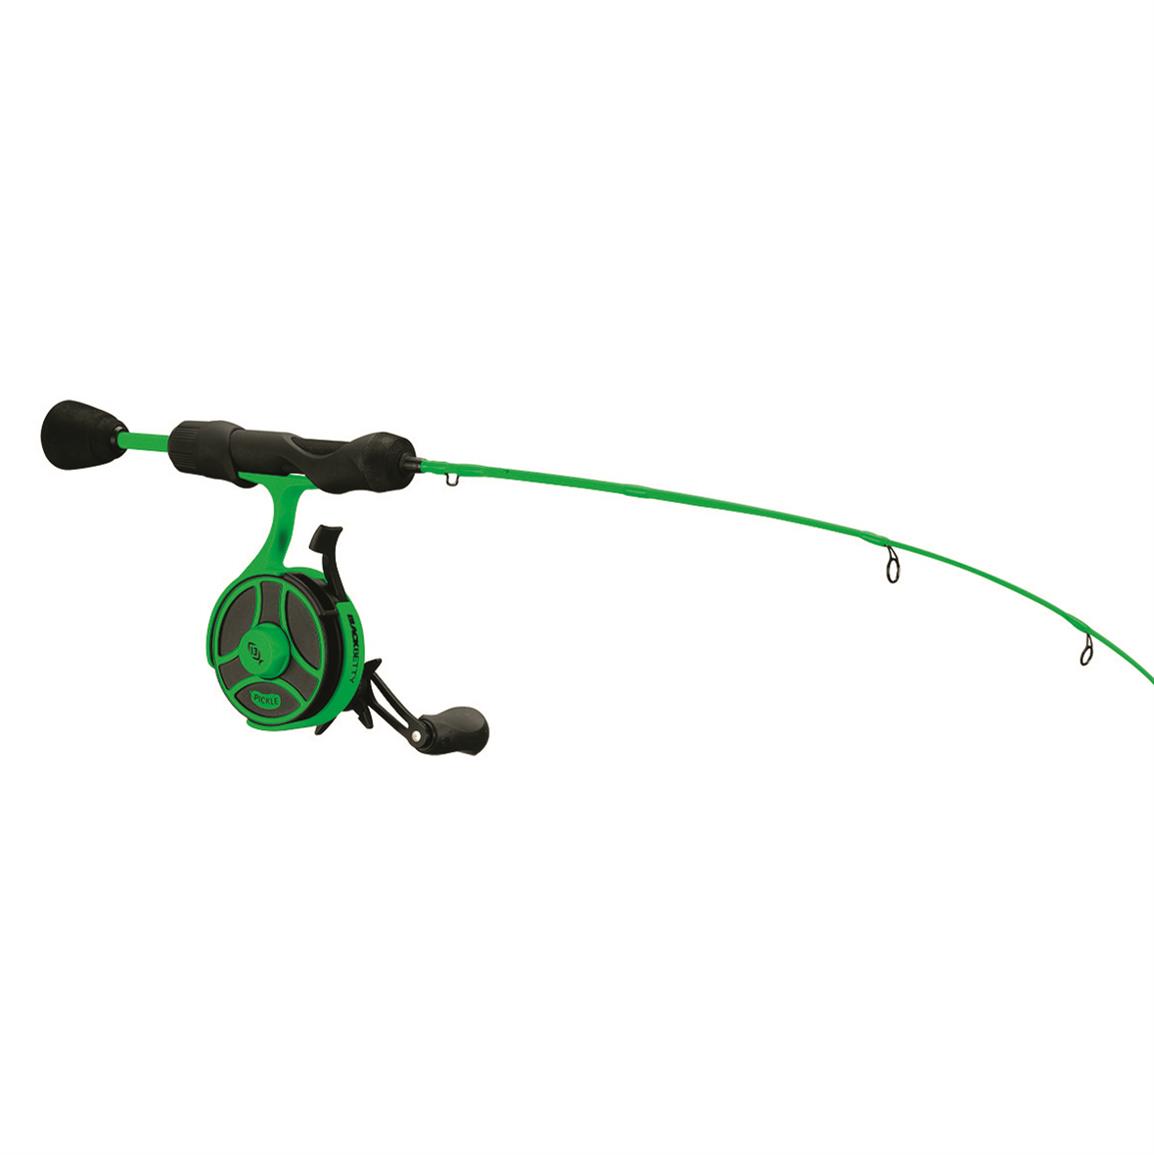 Clam Dave Genz Spring Bobber Ice Fishing Rod and Reel Combo, 25